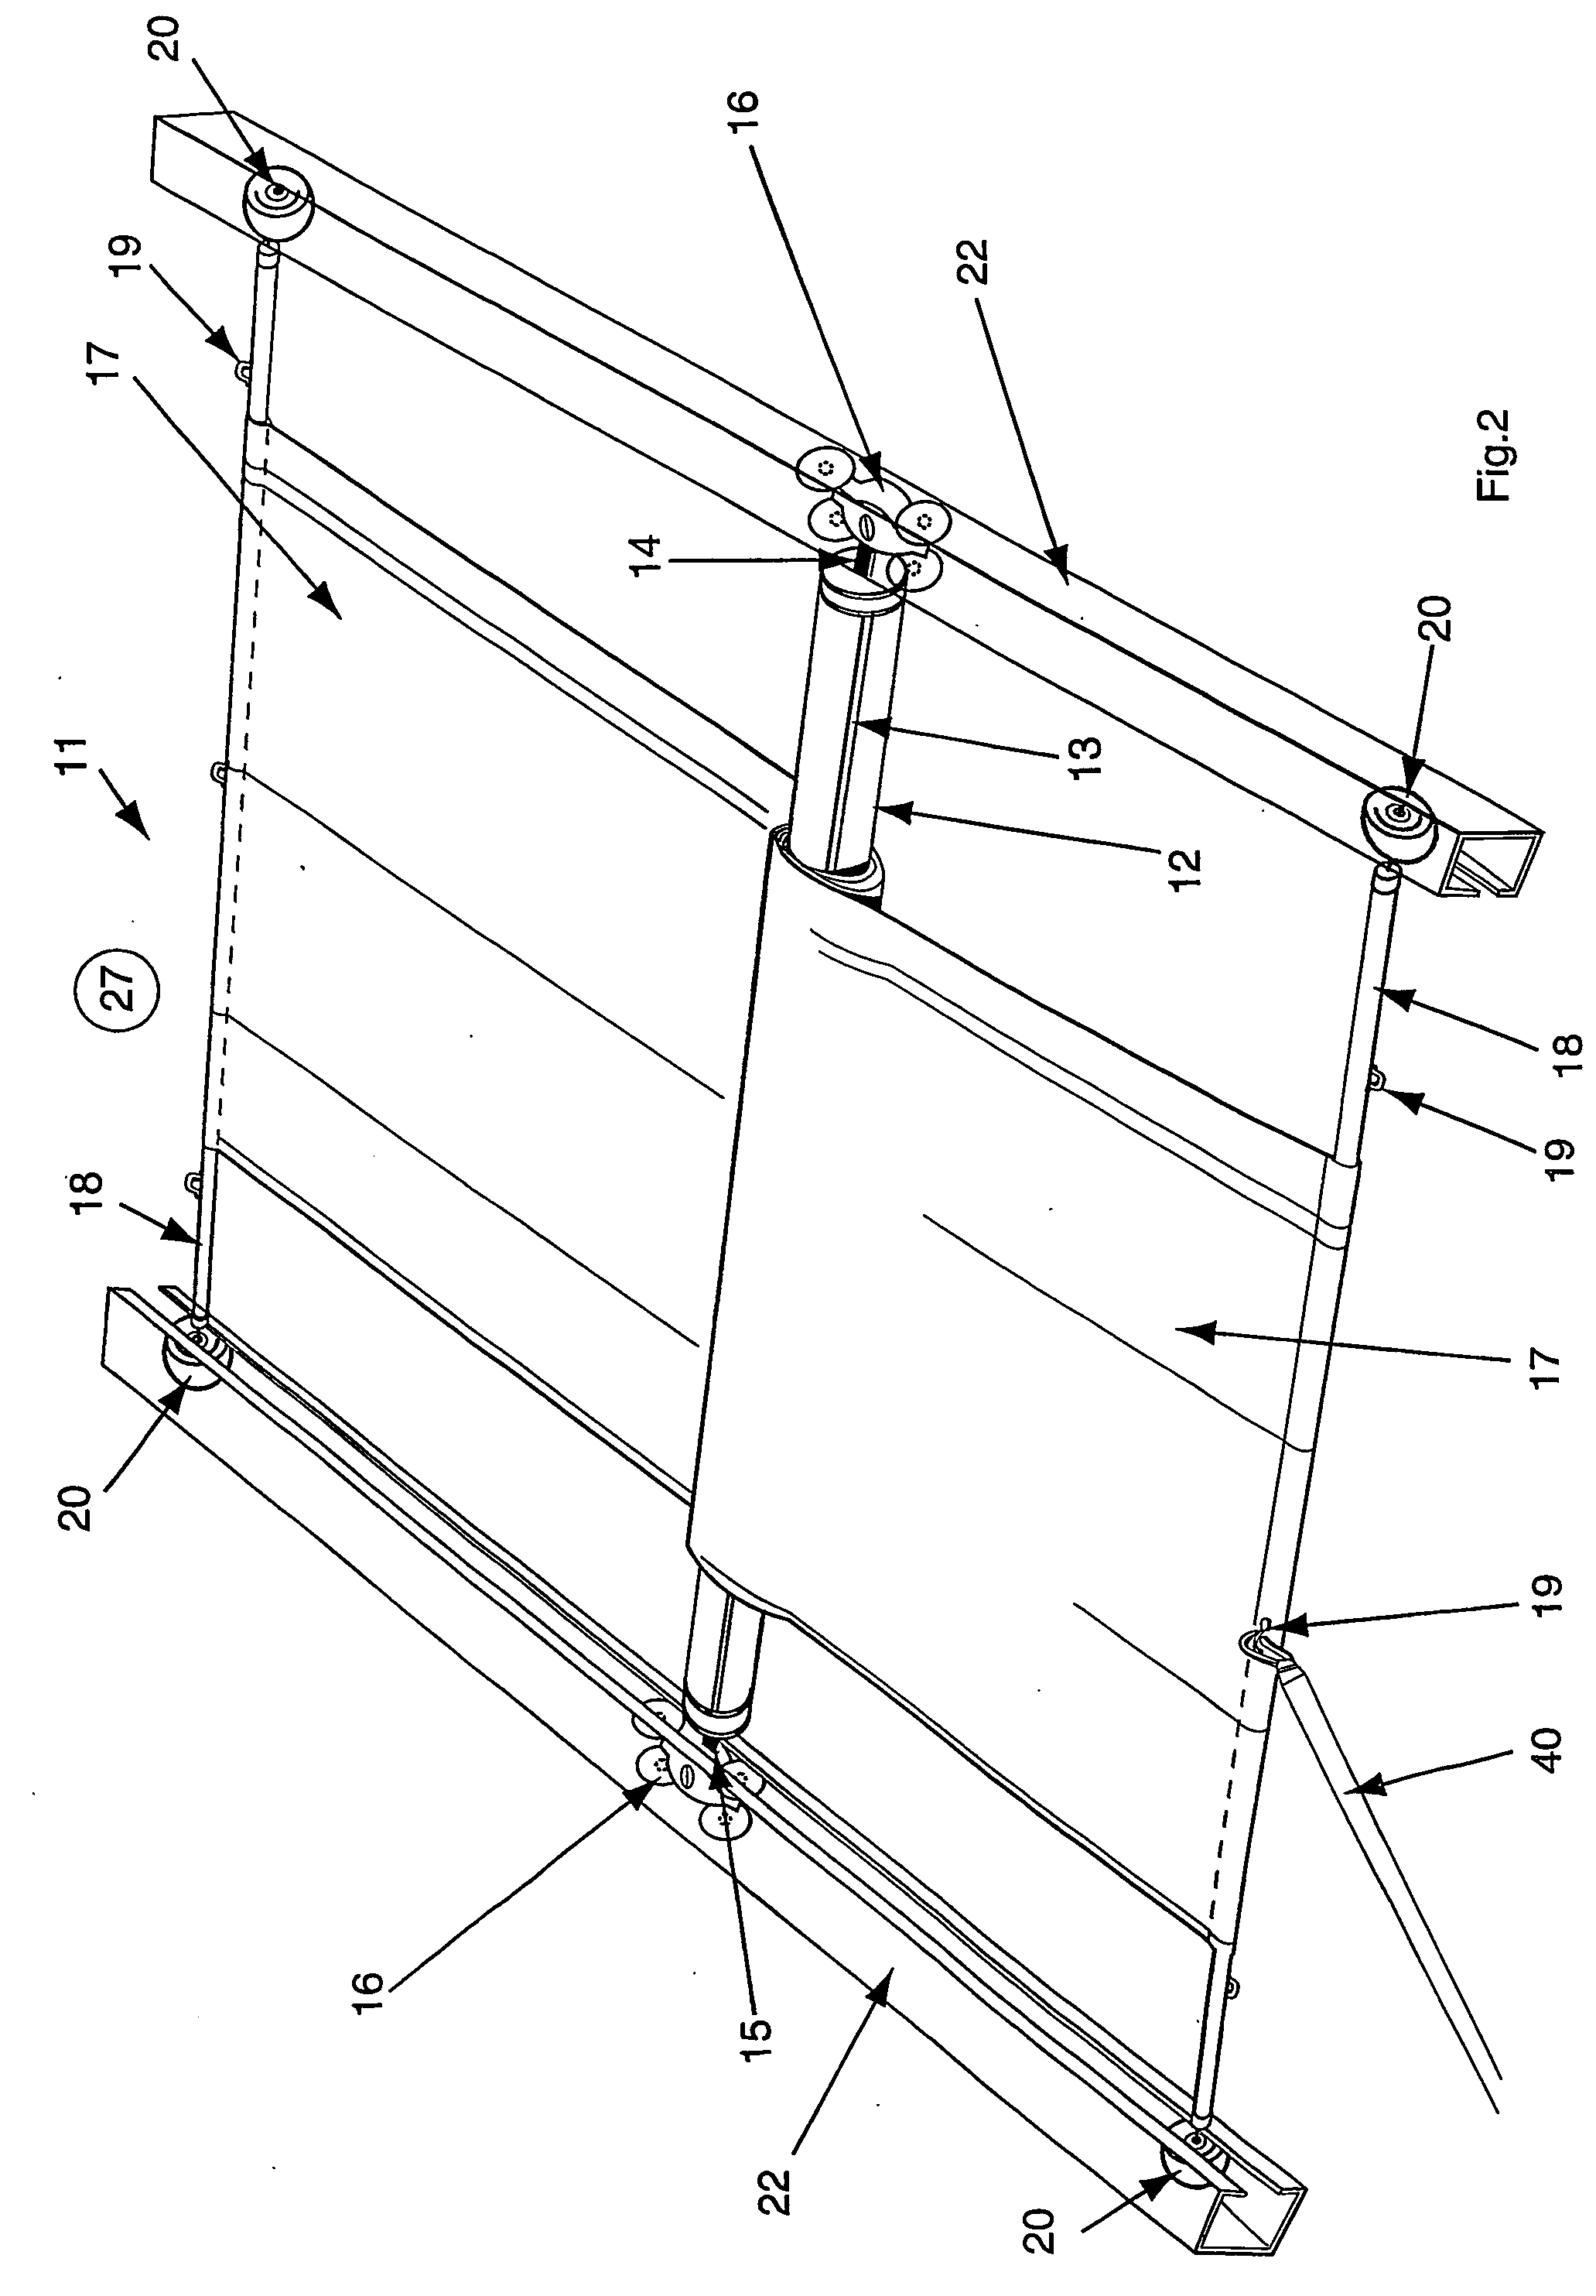 Retractable self rolling blind, awning or cover apparatus